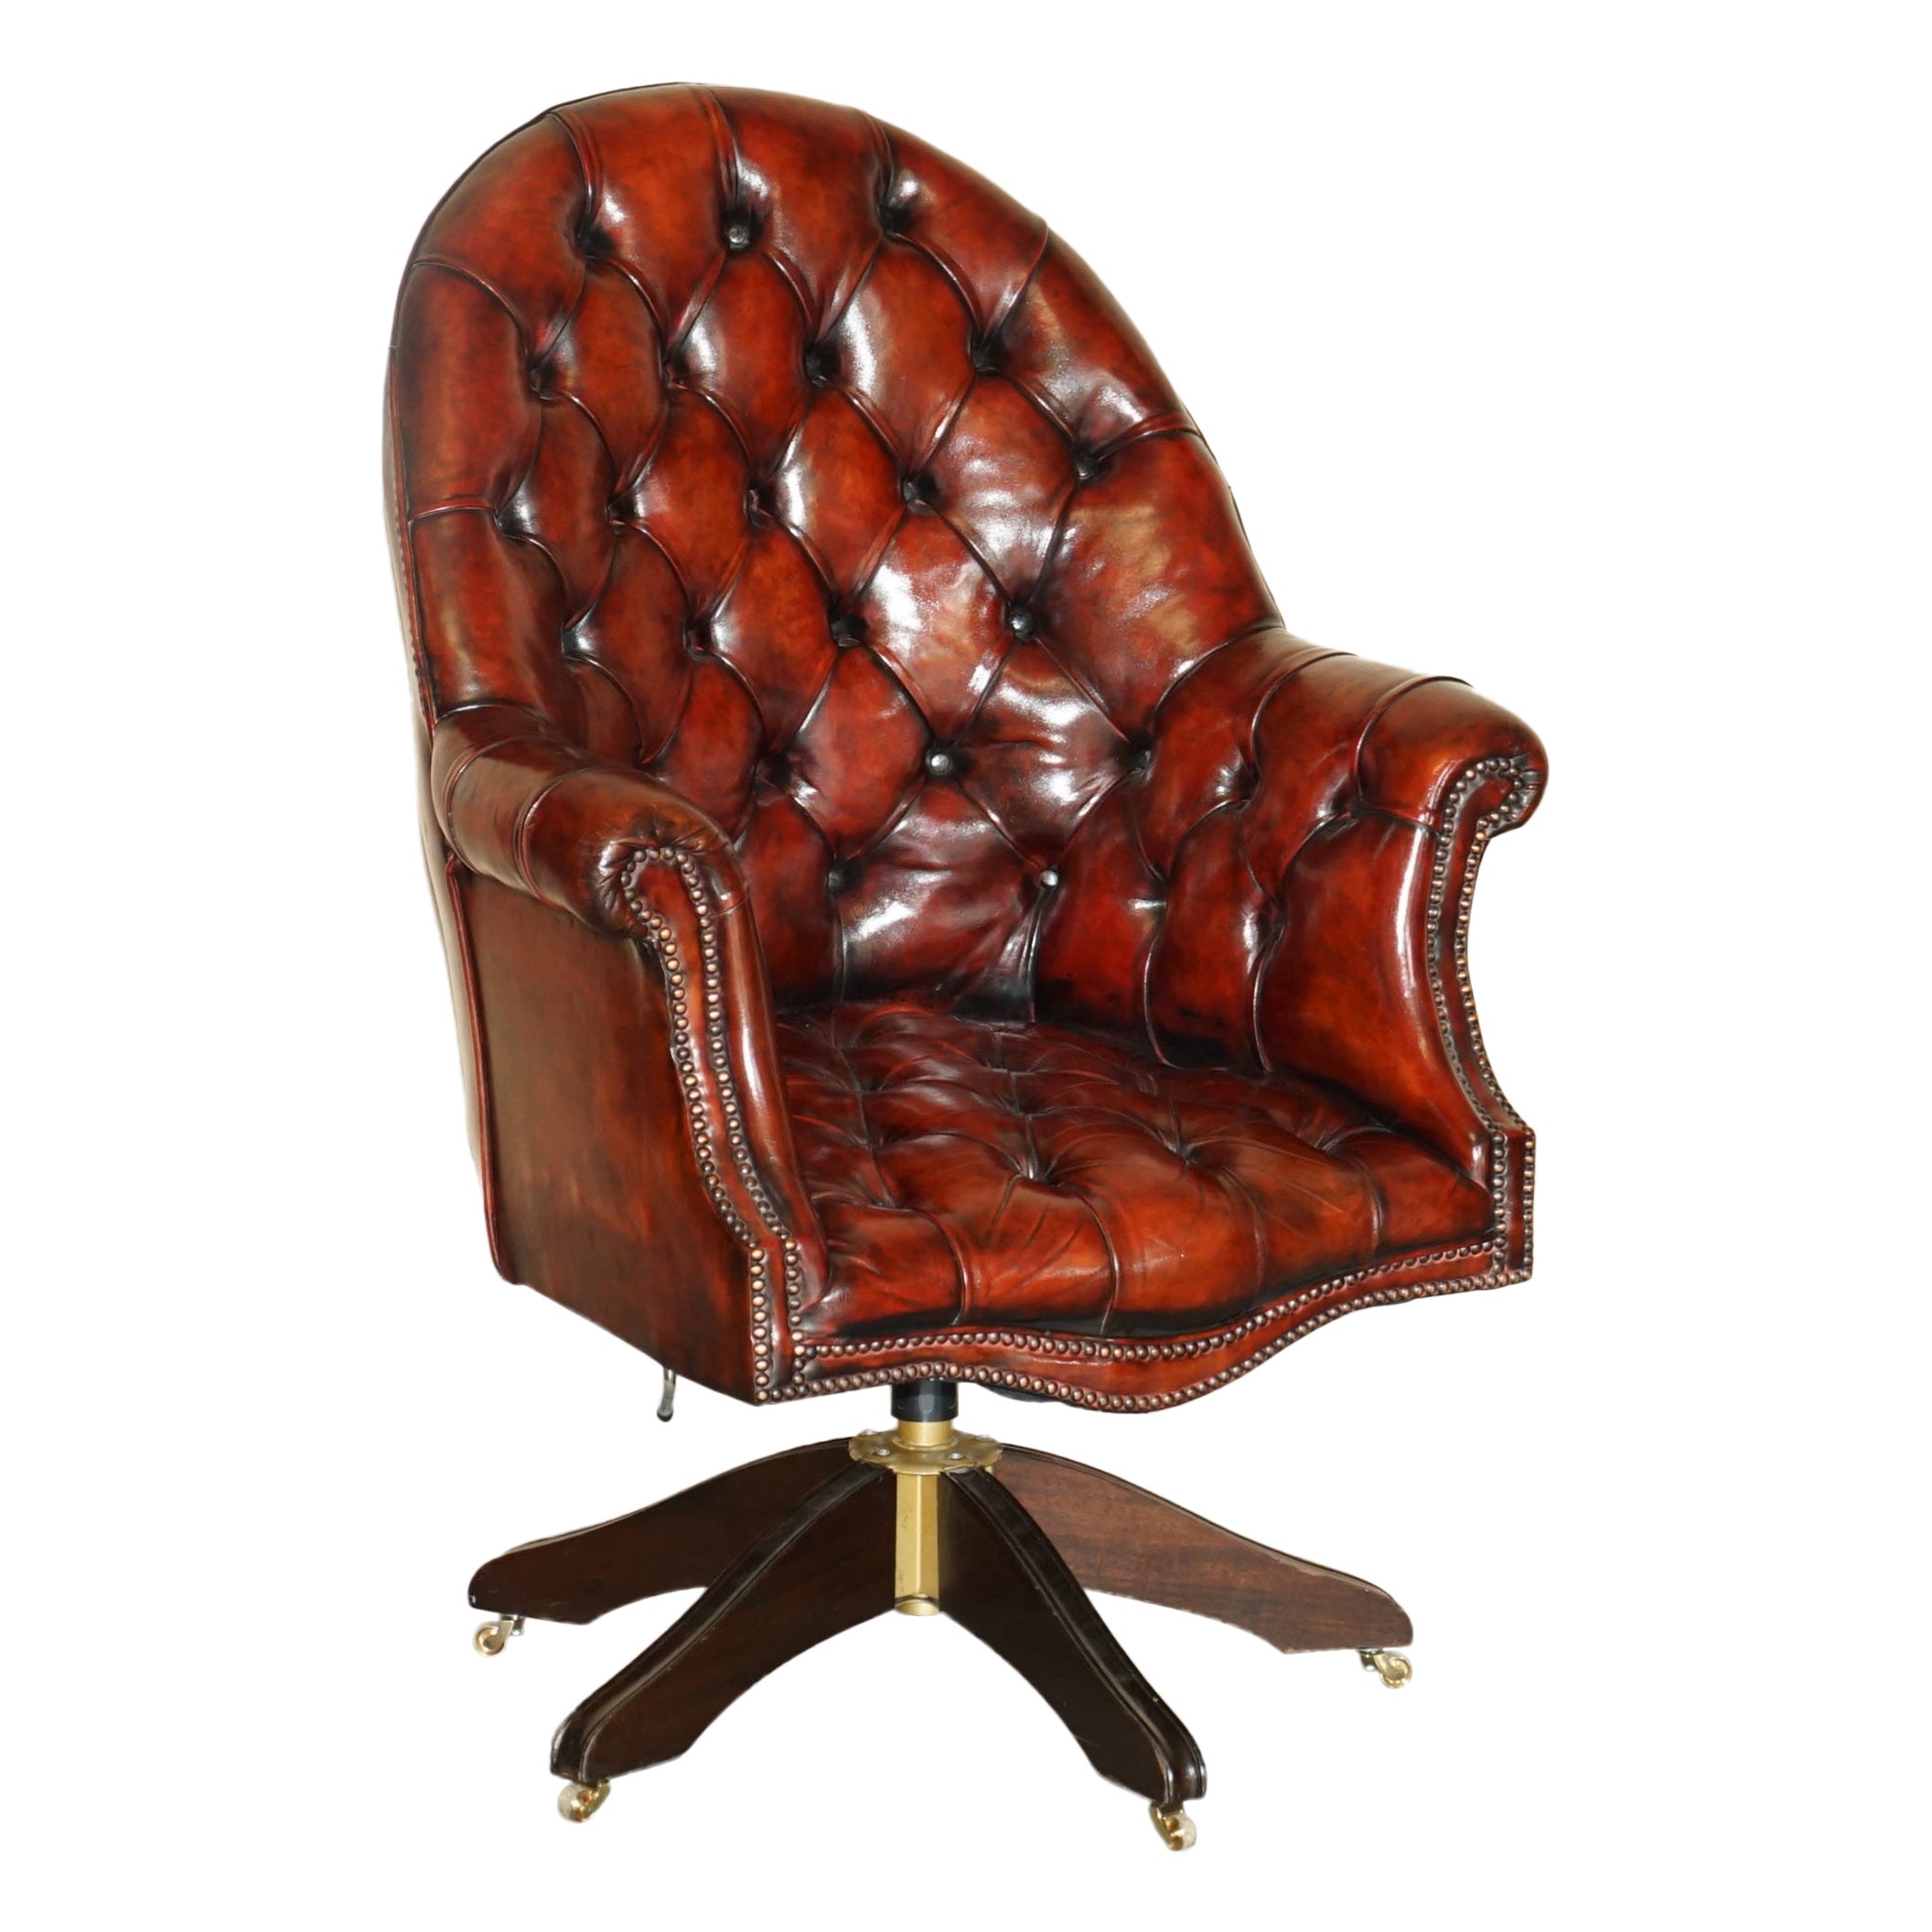 FINE RESTORED DIRECTORS BROWN LEATHER OAK FRAMED CHESTERFIELD CAPTAiNS ARMCHAIR